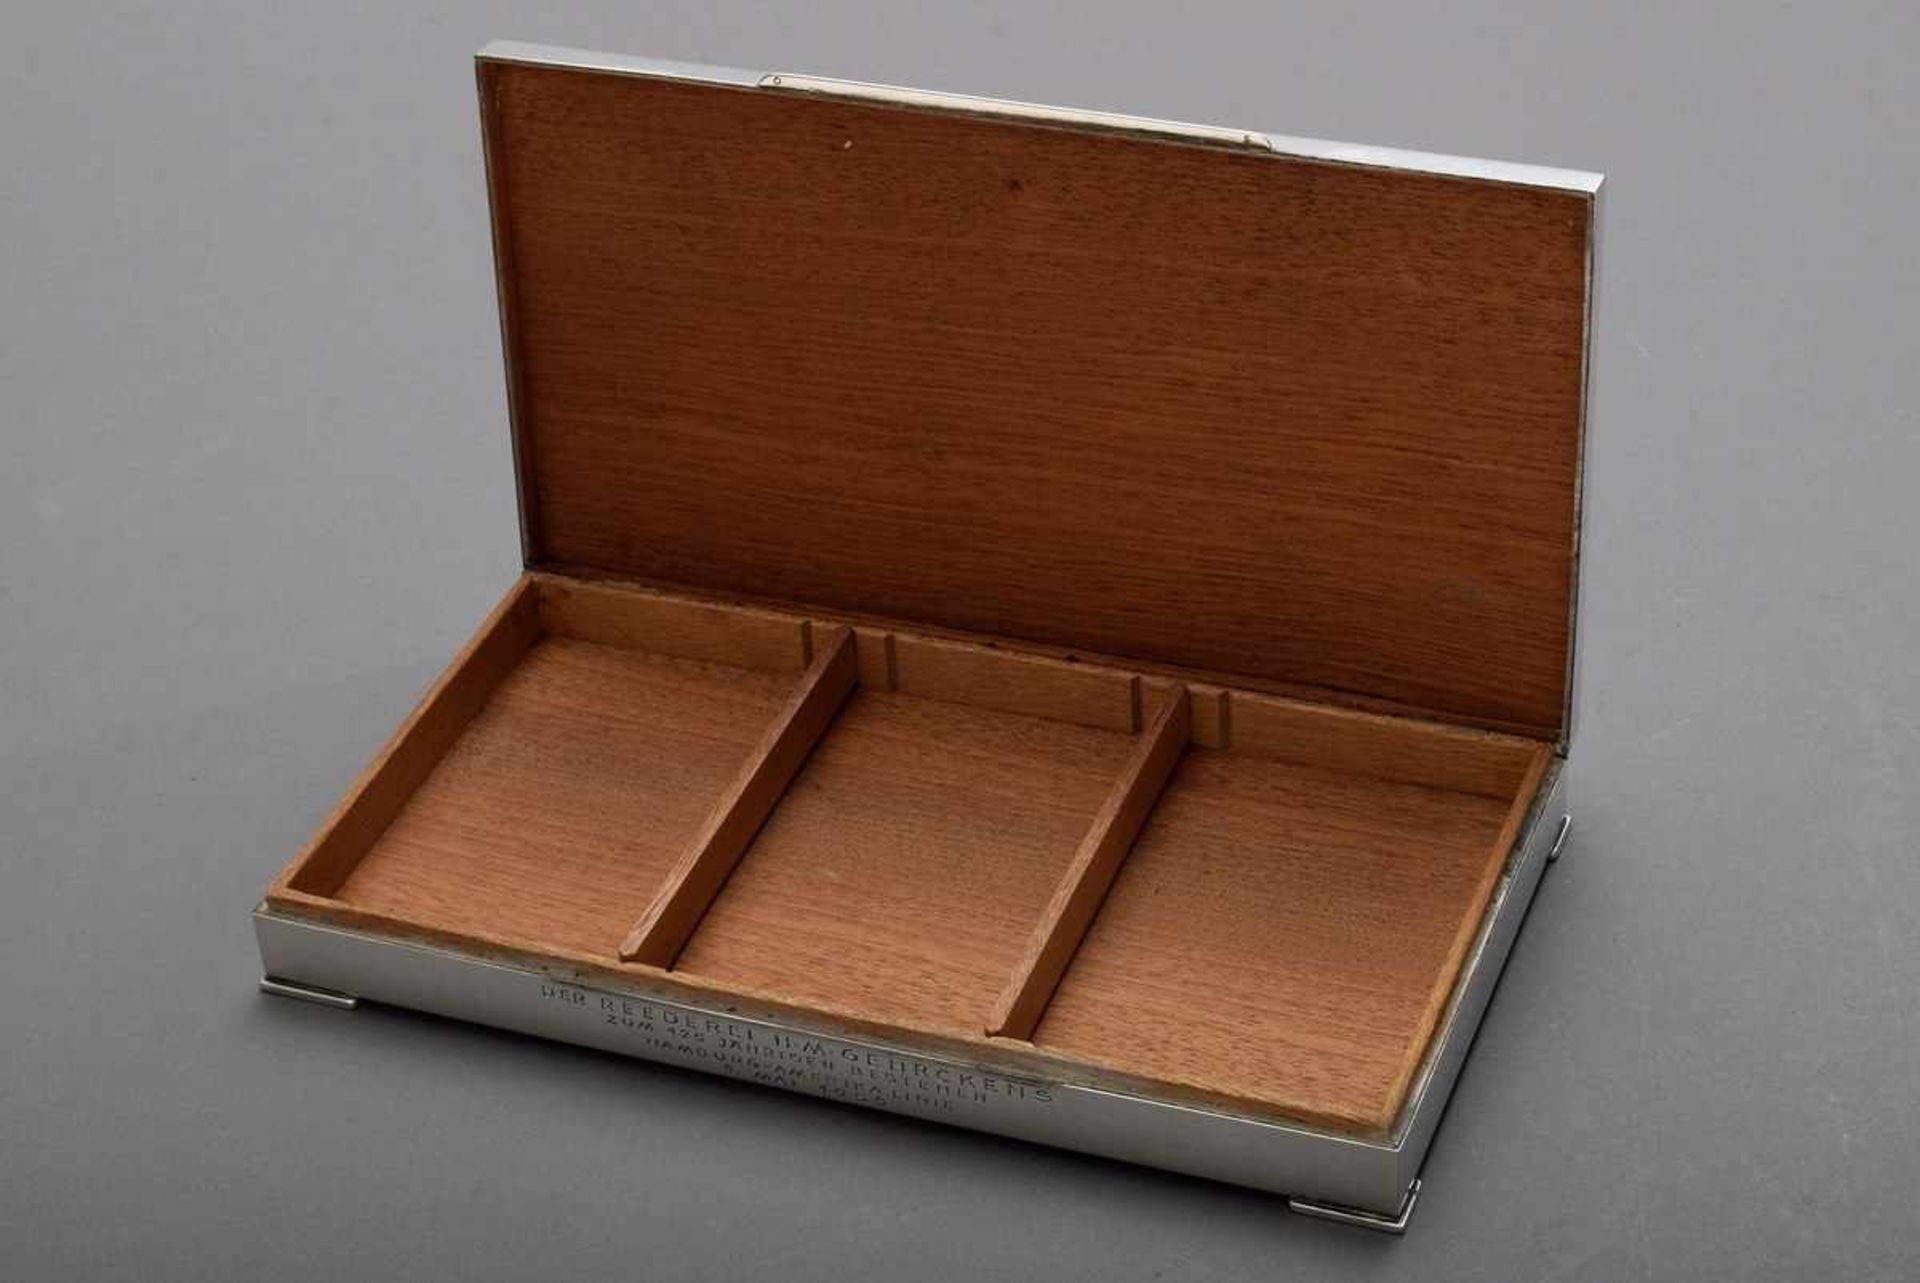 Cigarette box with grooved decoration and engraved dedication "Reederei H.M. Gehrckens", wooden - Bild 6 aus 6